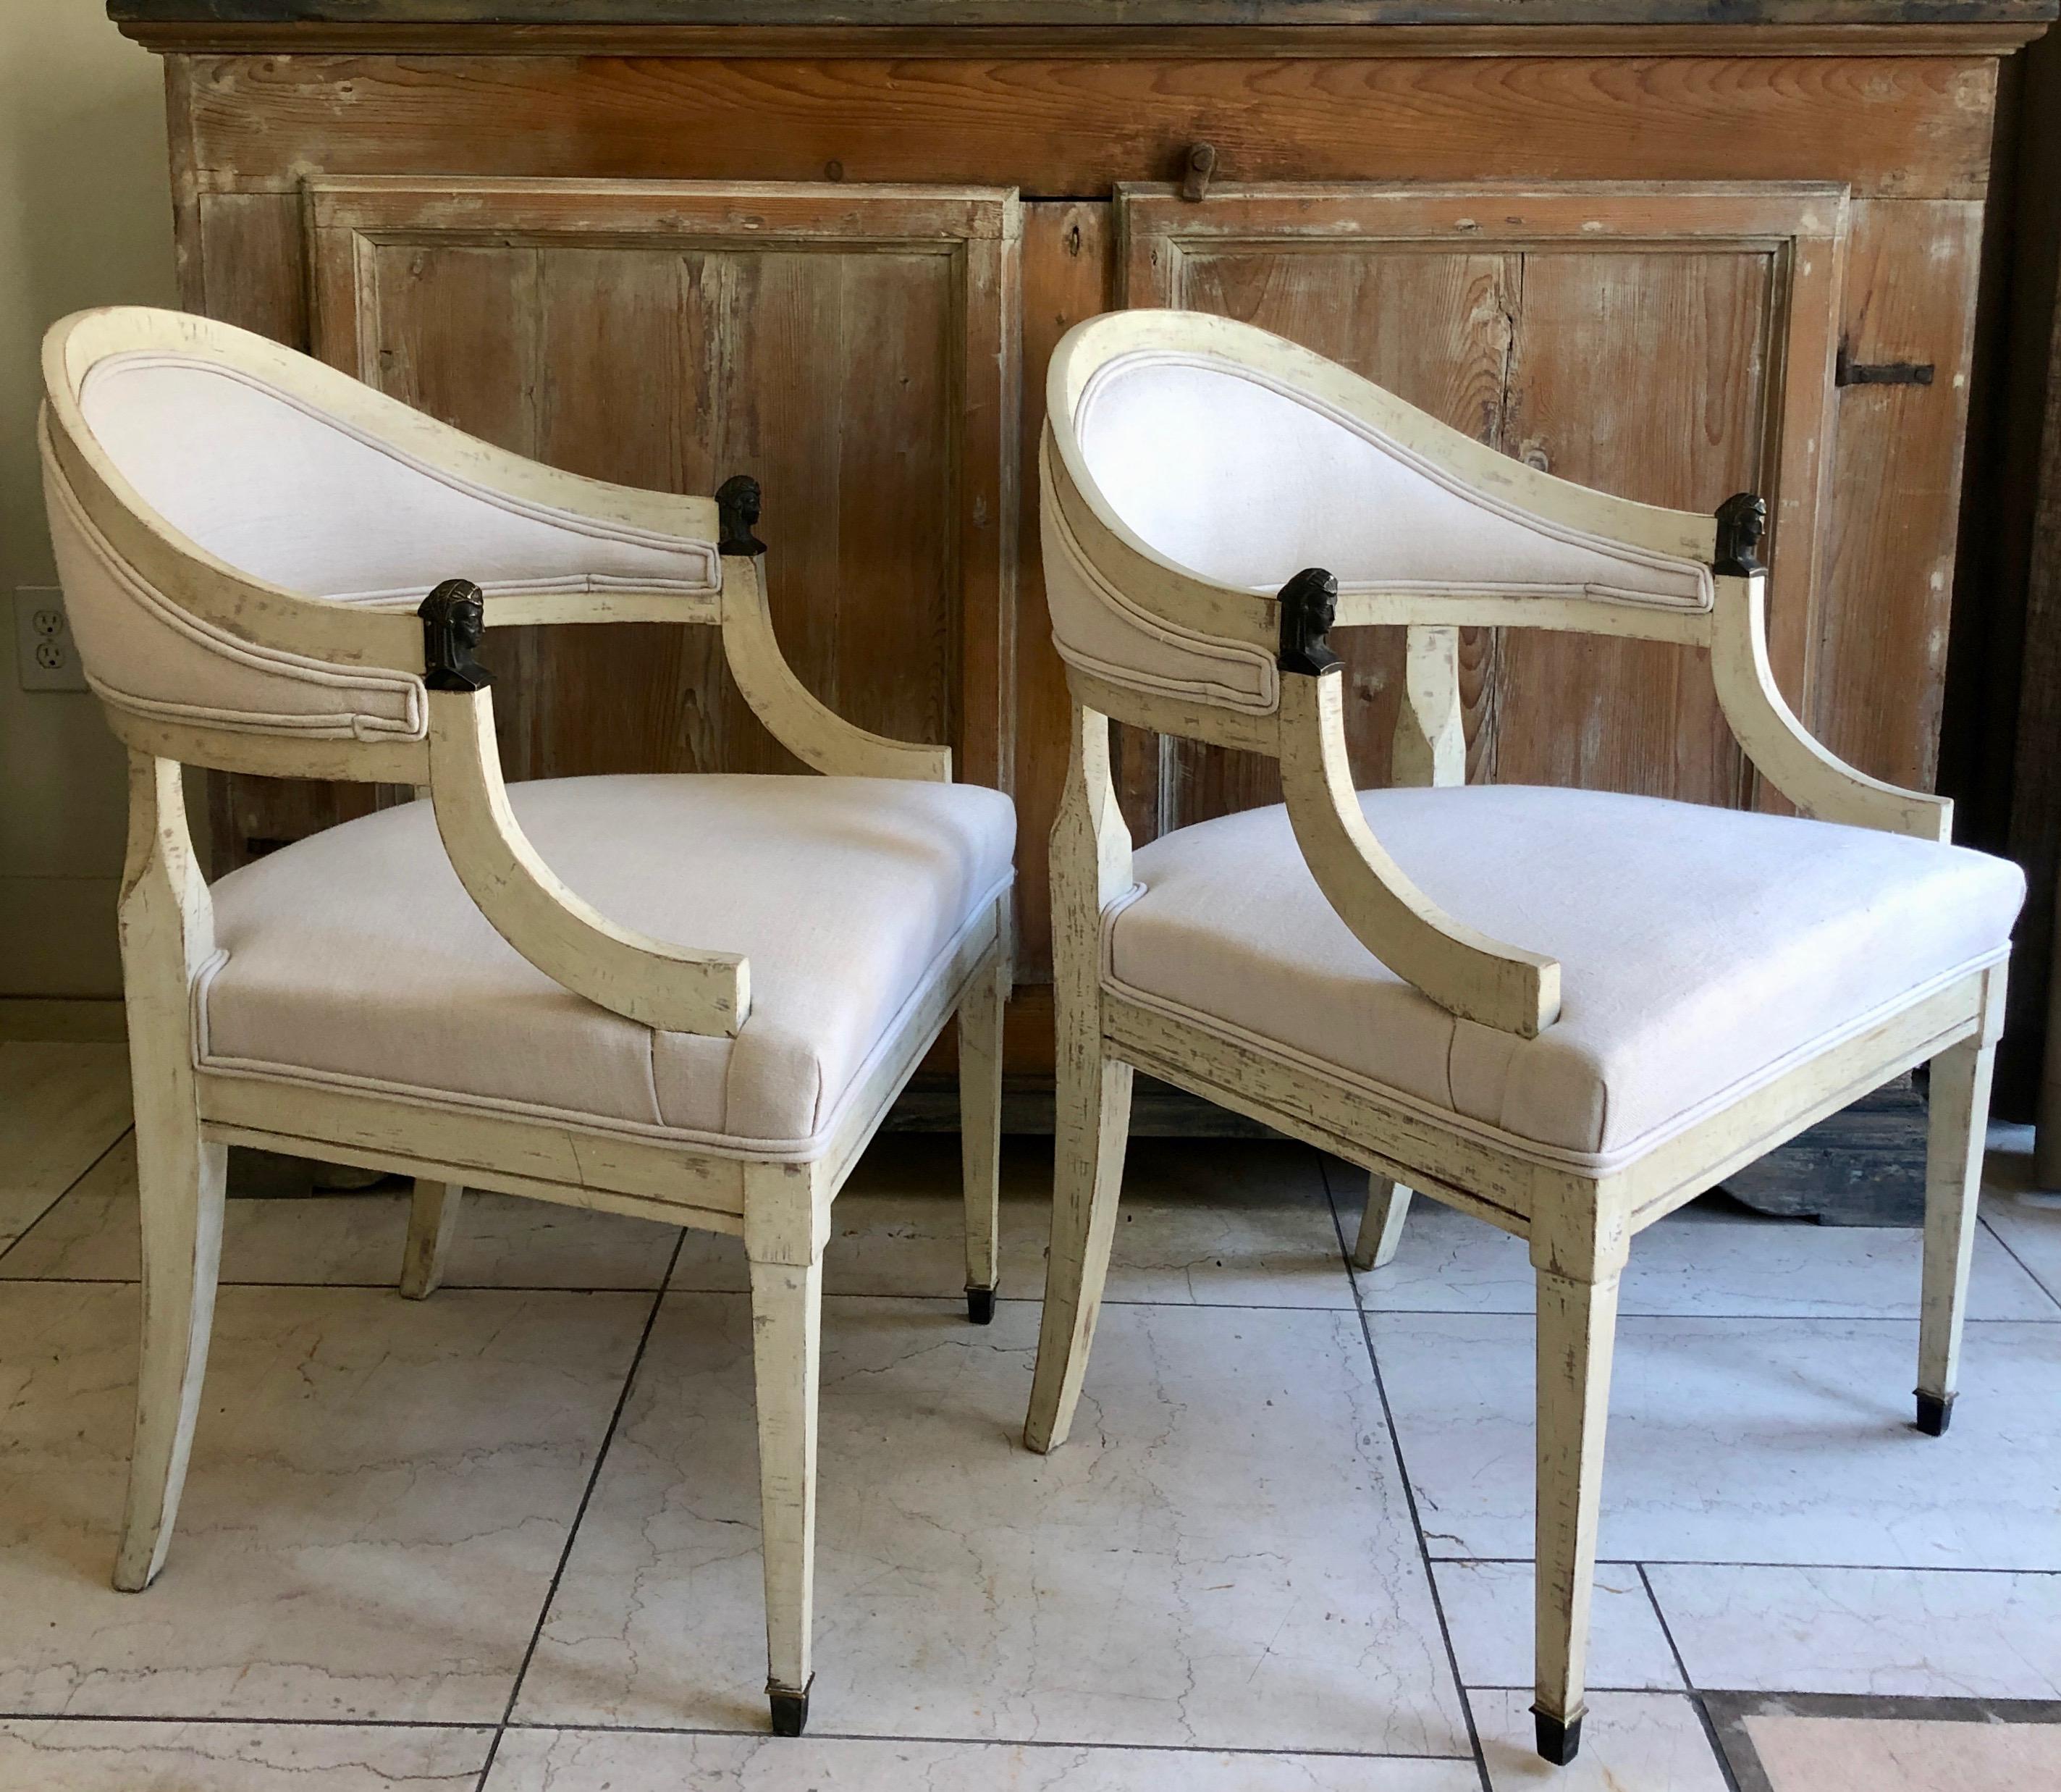 Pair of barrel back chairs, Sweden circa 1890, with rounded form, bronze figural pharaoh head details on handrest and slender tapered legs with bronze fittings. Original worn cream/ white paint finish and new linen upholstery.
More than ever, we